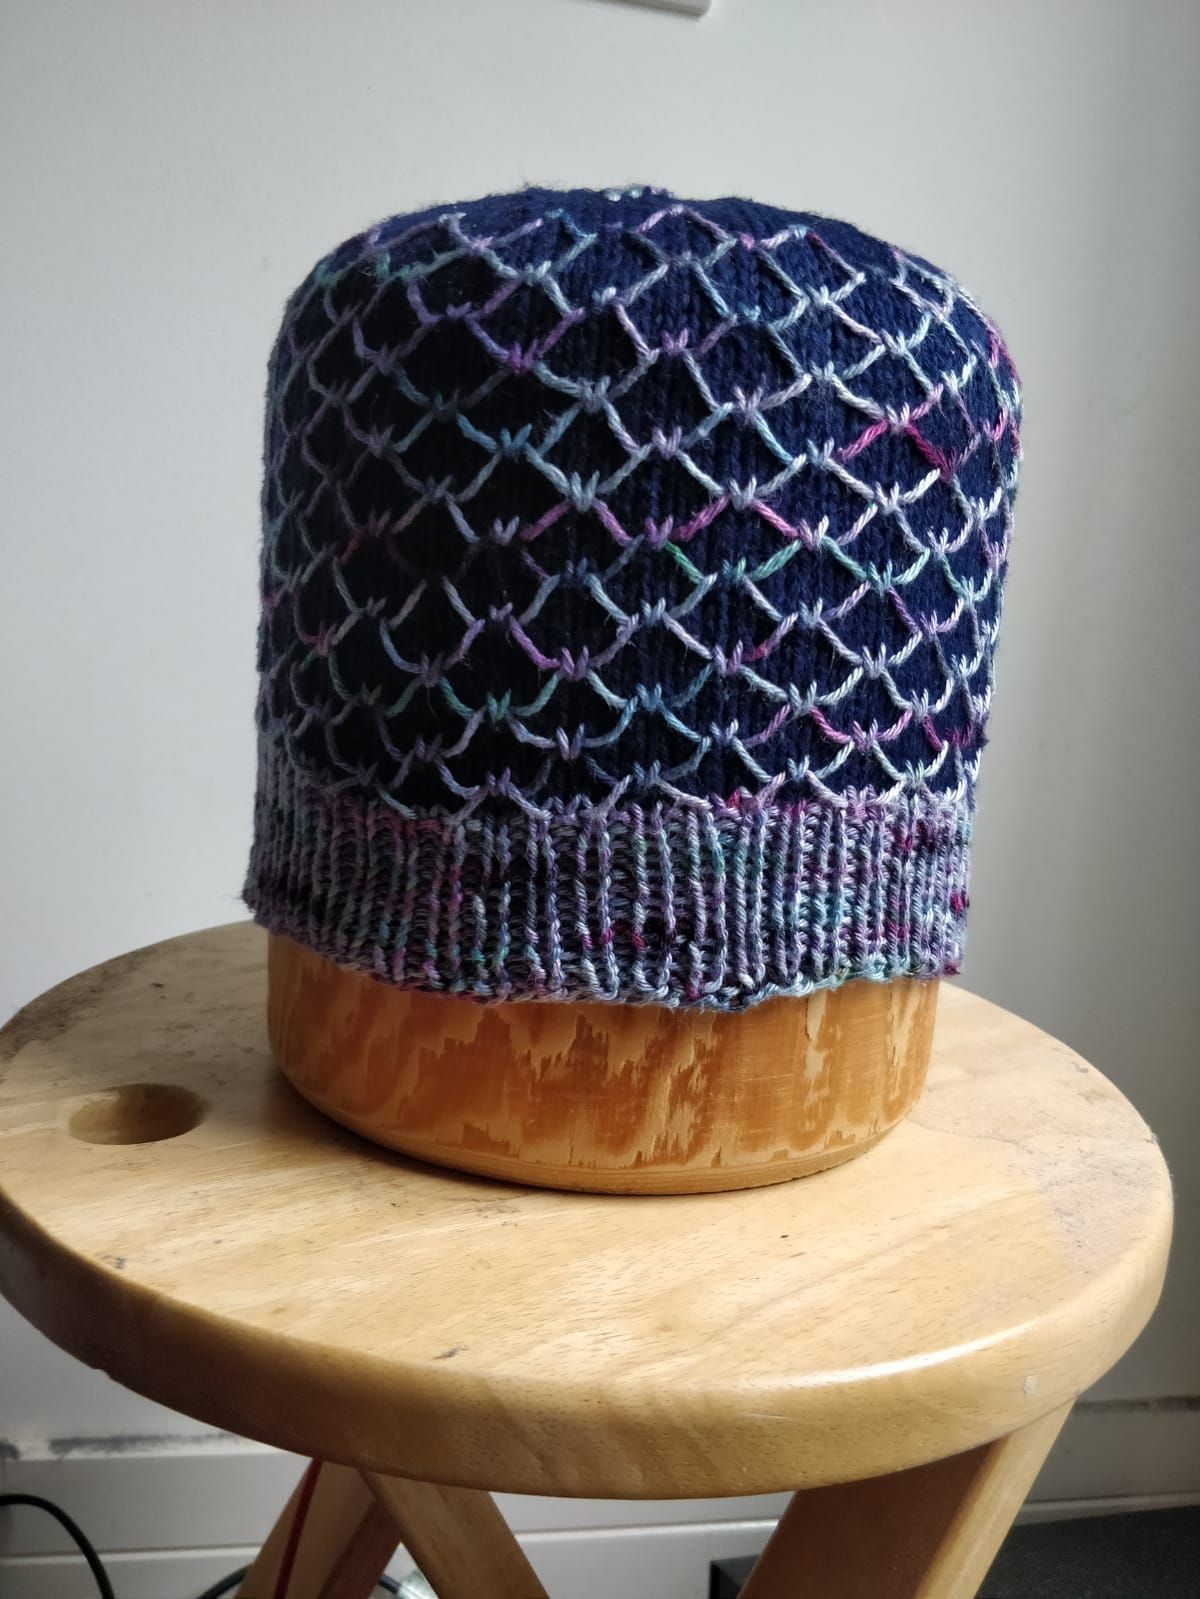 Koah in Dark blue CC and variegated MC on traditional wooden hat blocker on a round wooden table